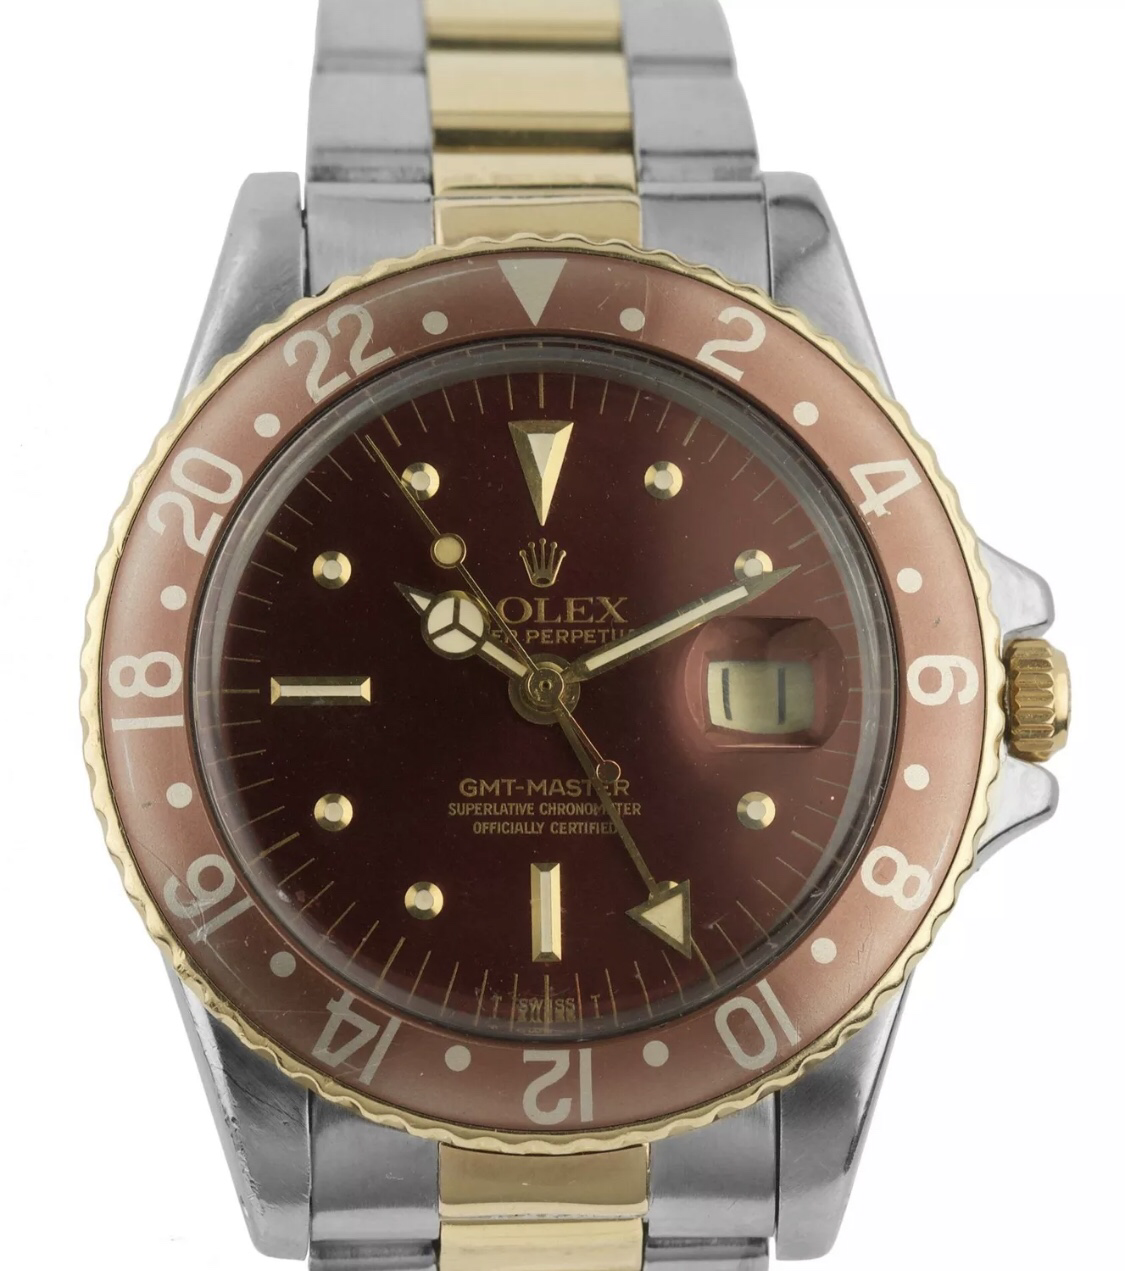 Rolex 1675 GMT Root Beer - Buying all Rolex, Breitling, Cartier, IWC, Panerai Watches Collectors Coins & Jewelry Lynbrook (516)341-7355